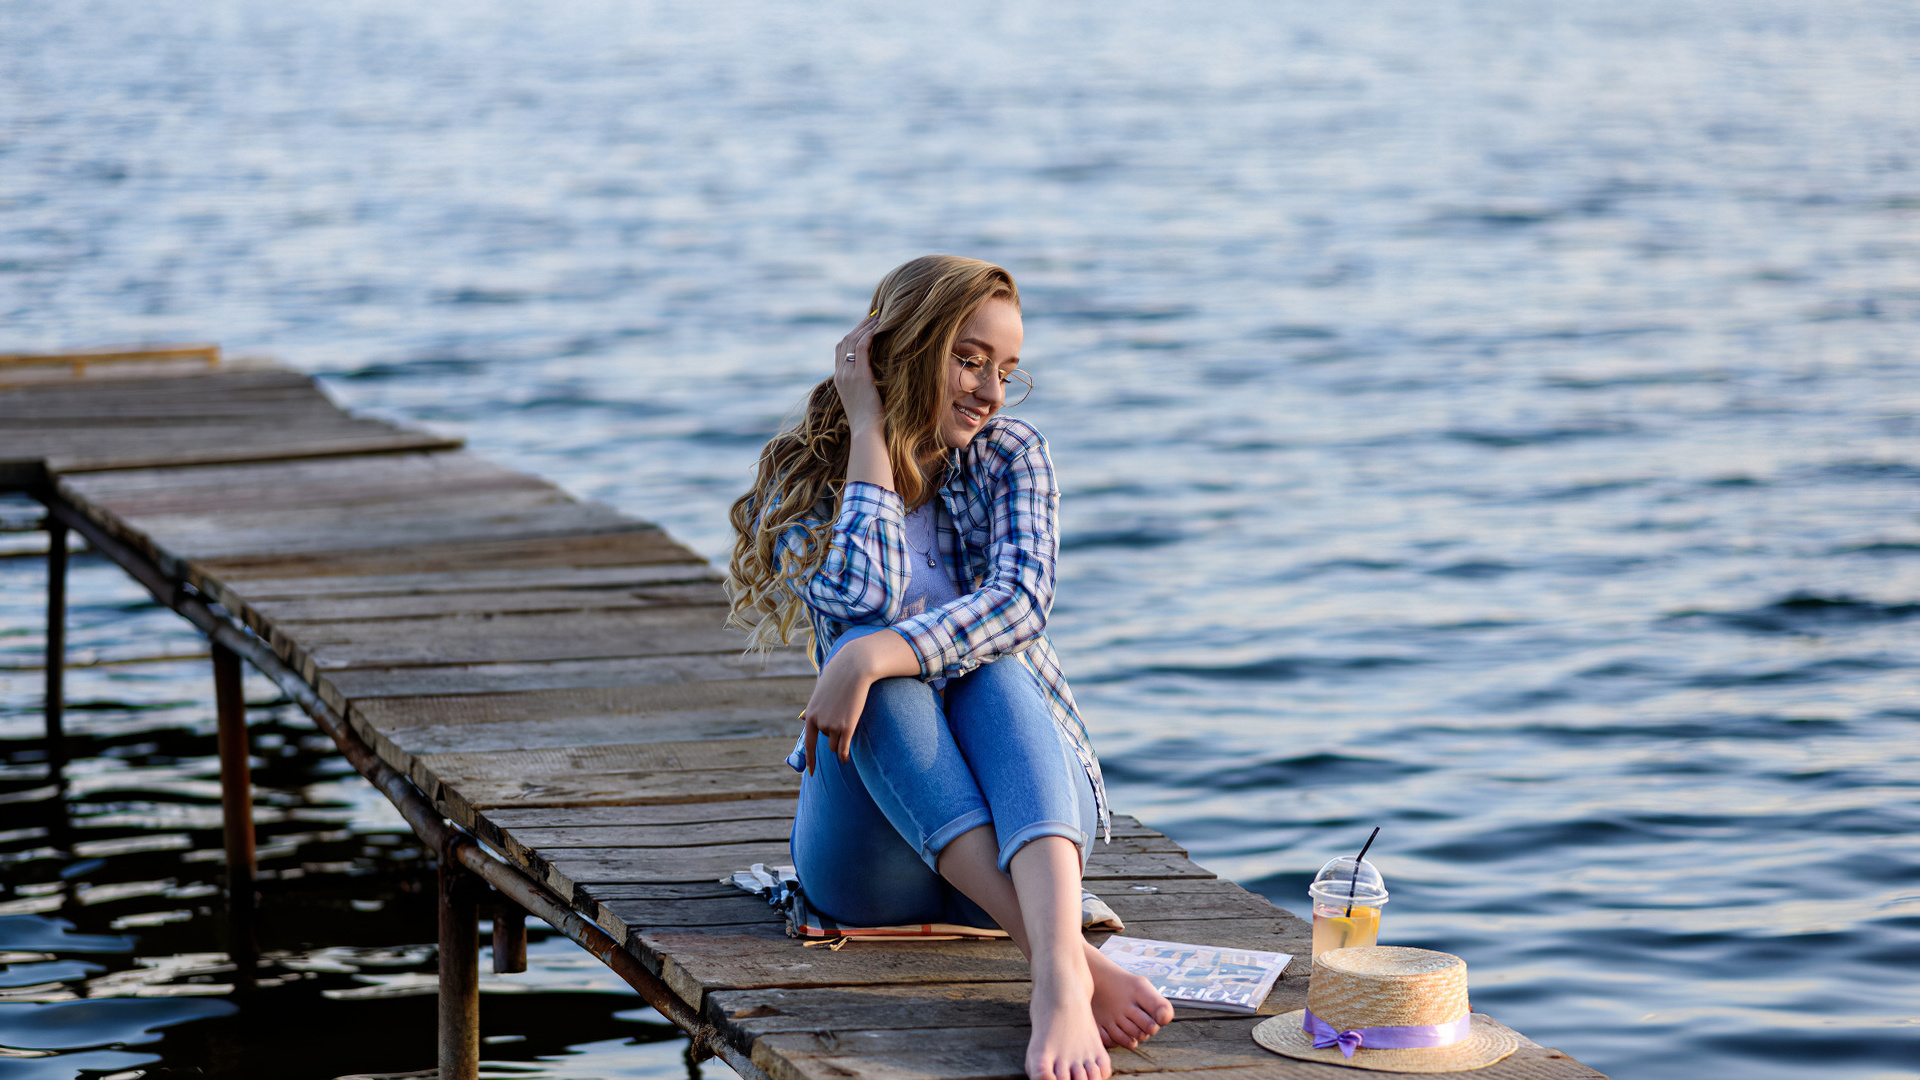 women, blonde, model, women outdoors, plaid shirt, jeans, hips, water, women with glasses, straw hat, lake, sitting